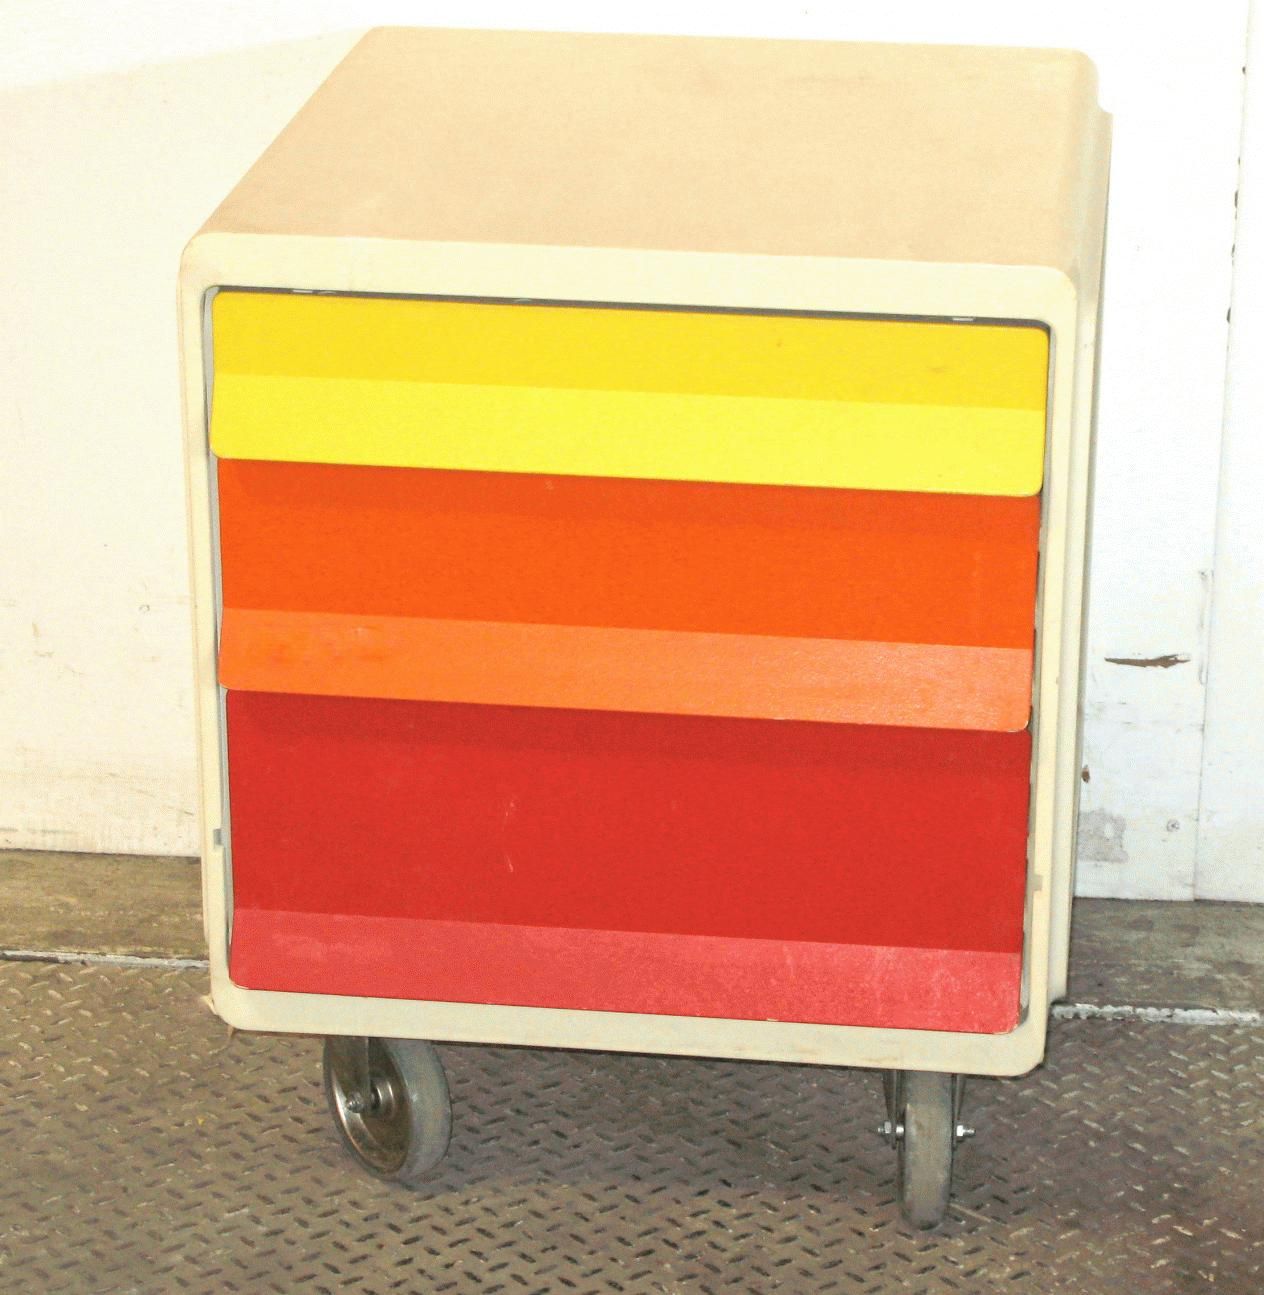 AMSCO Unicell 9DCELL Color Coded Rolling Medical Supply Cart